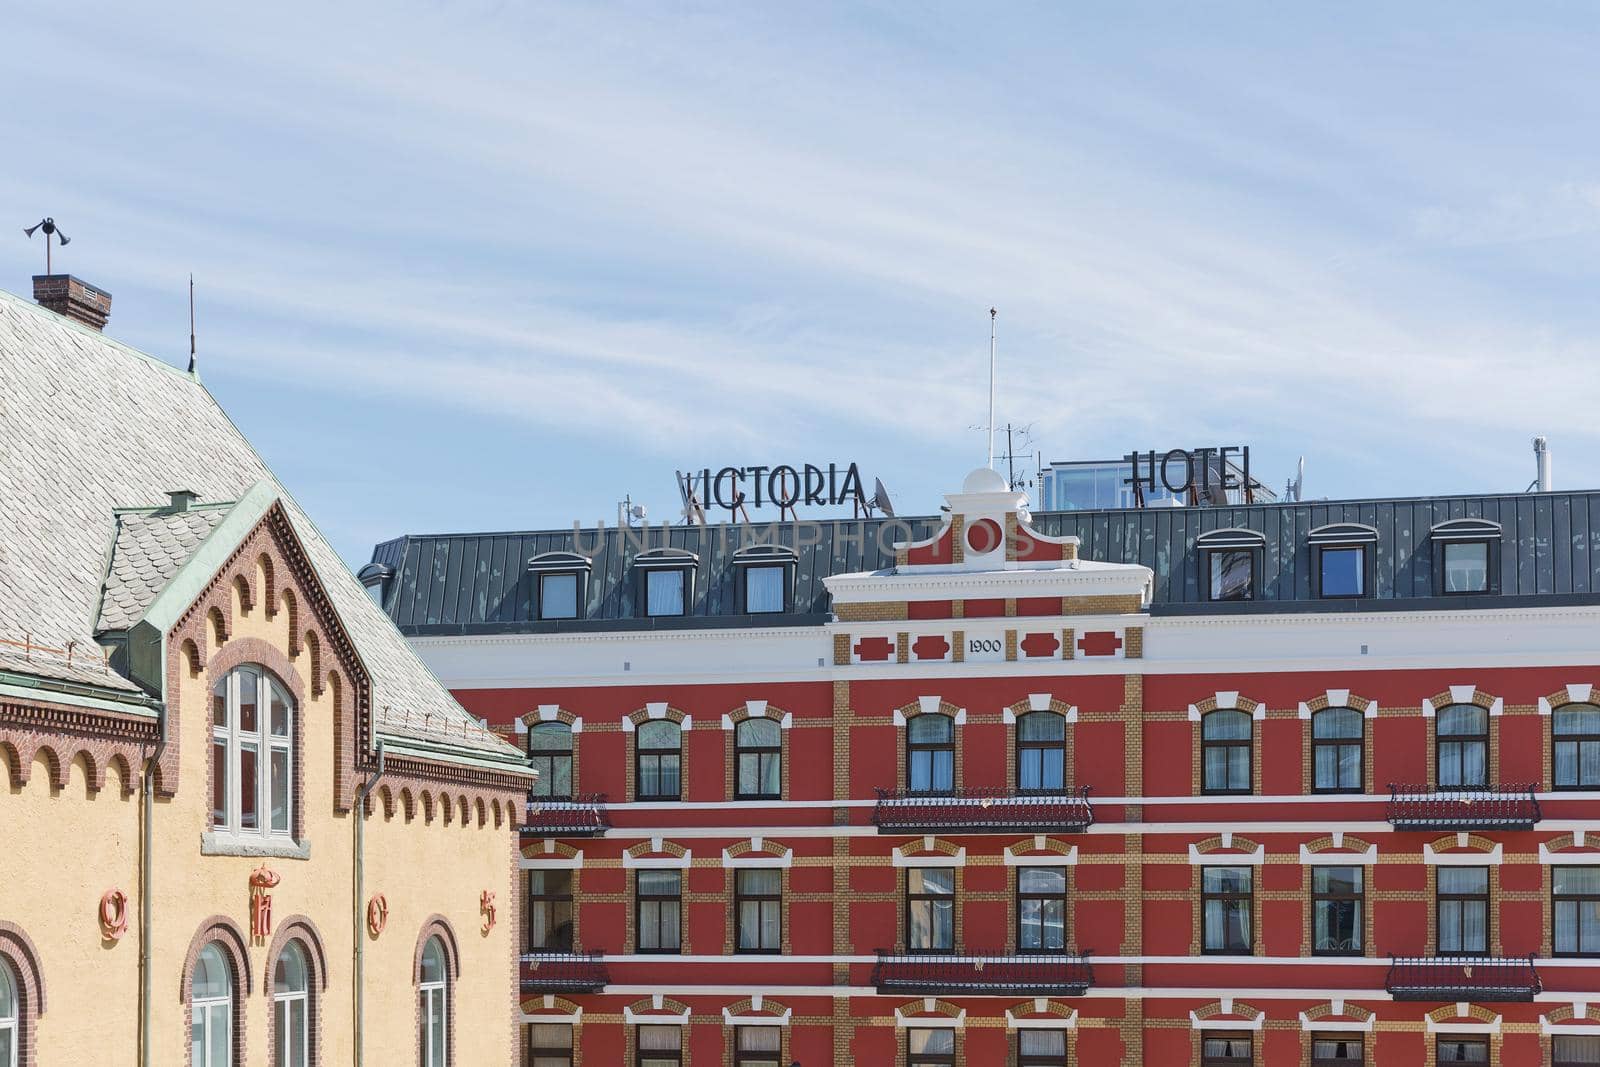 STAVANGER, NORWAY - JUNE 01, 2017: Hotel Victoria and architecture in the city of Stavanger in Norway.